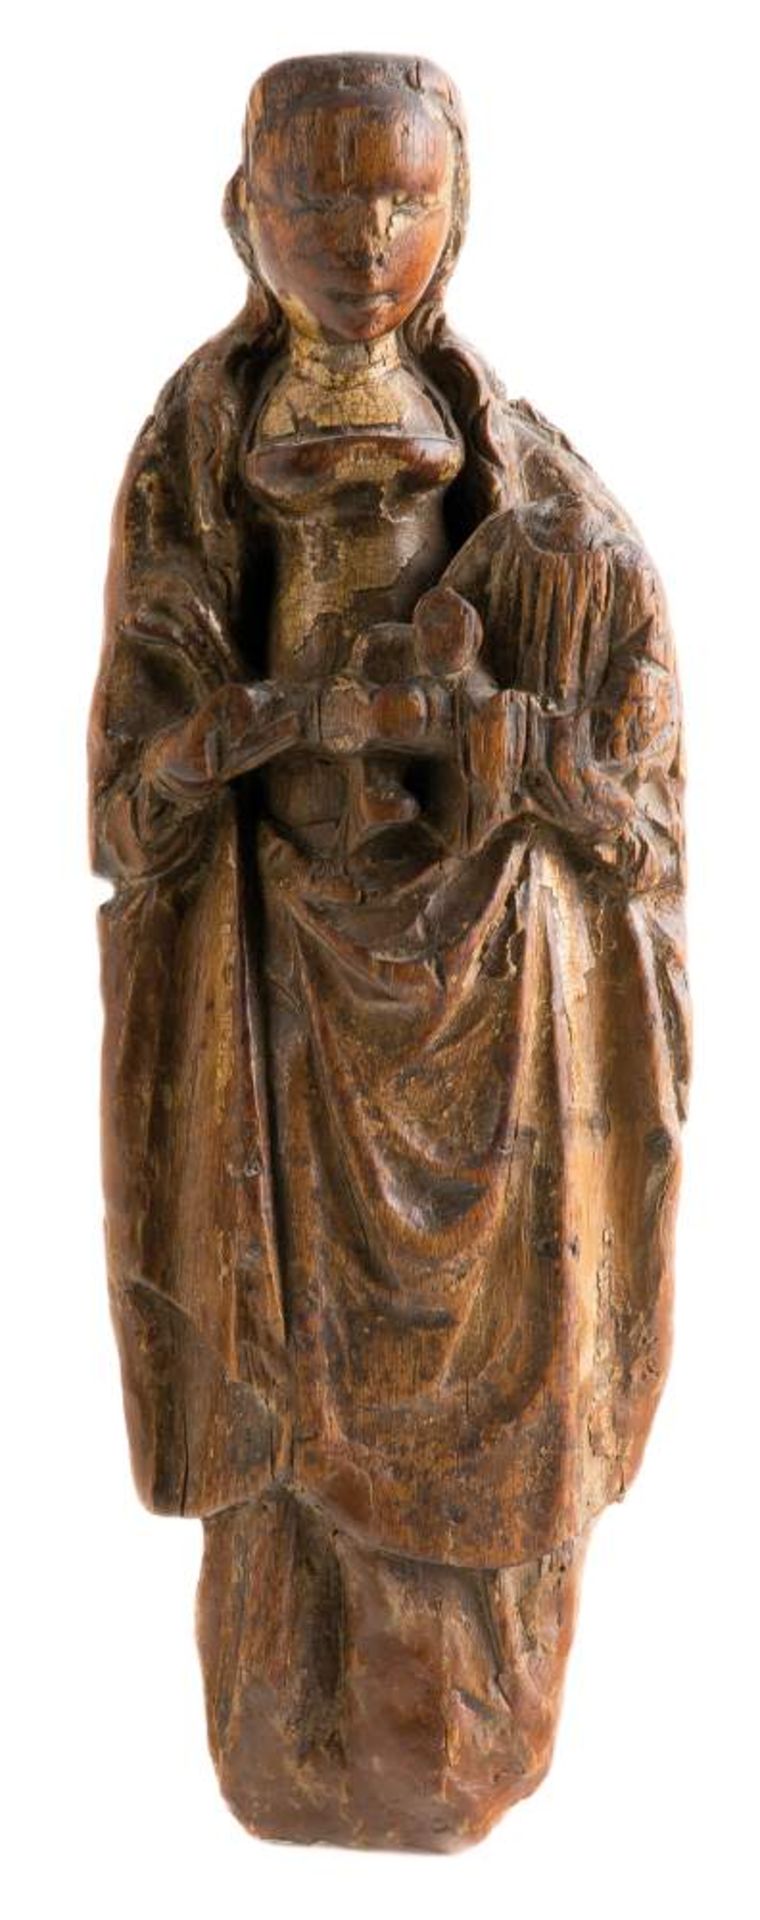 "Virgin with Child". Carved wooden sculpture with polychrome residue. Mechelen. Circa. 1515. The